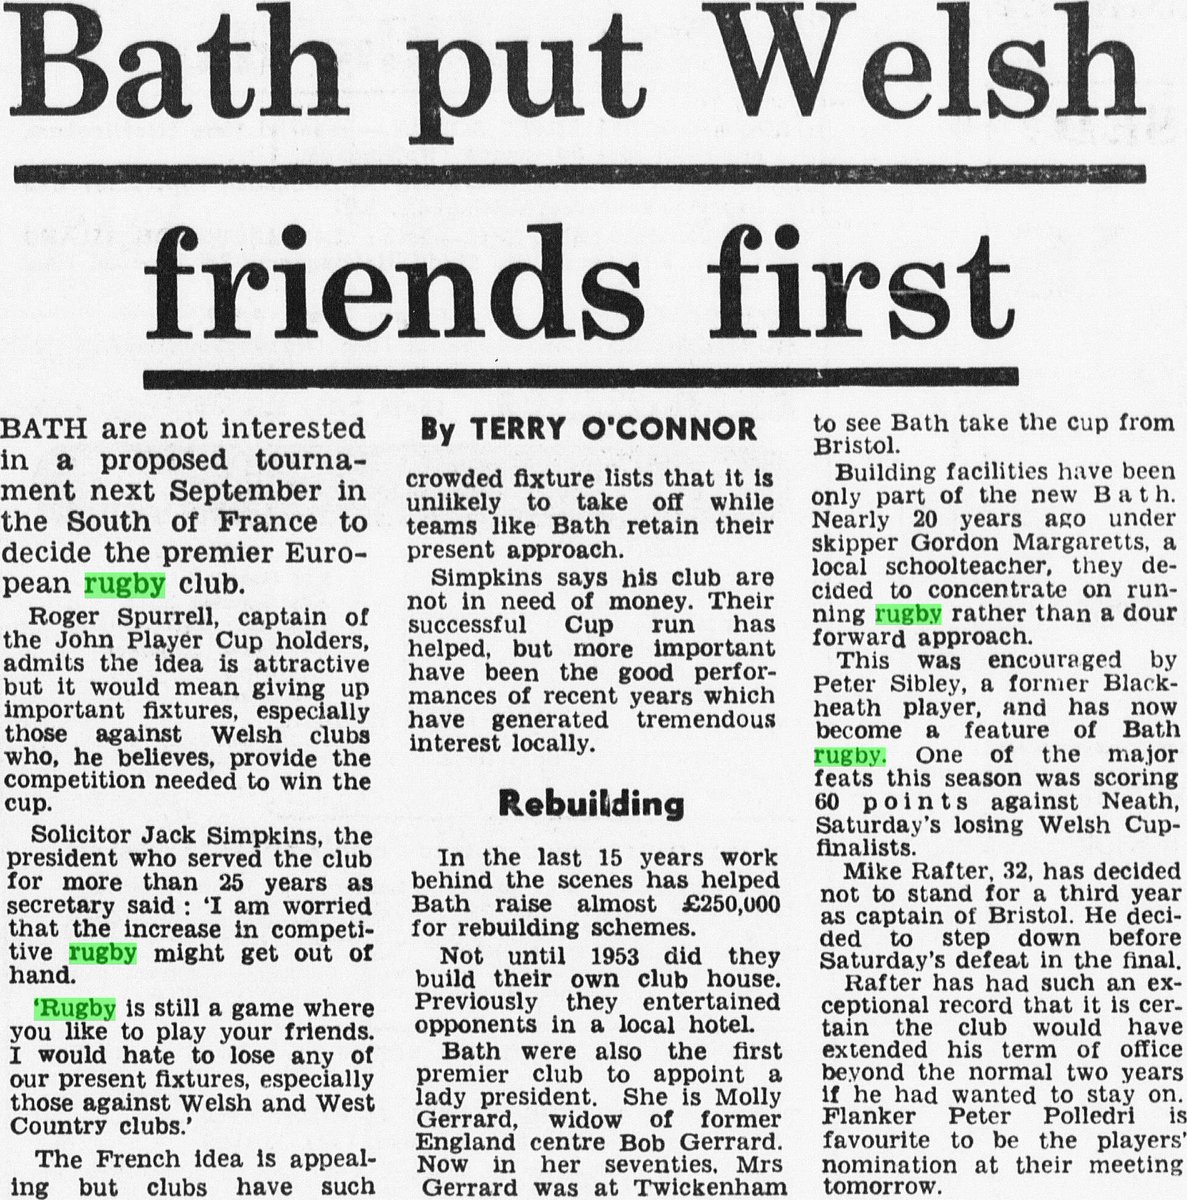 40 yrs ago @BathRugby put 🏴󠁧󠁢󠁷󠁬󠁳󠁿 friends 1st and decline French tournament. 'Rugby is still a game played against your friends. I would hate to lose any of our present fixtures, especially those against Welsh and West Country friends' and we 'are not in need of money' #AllezBath 🛁